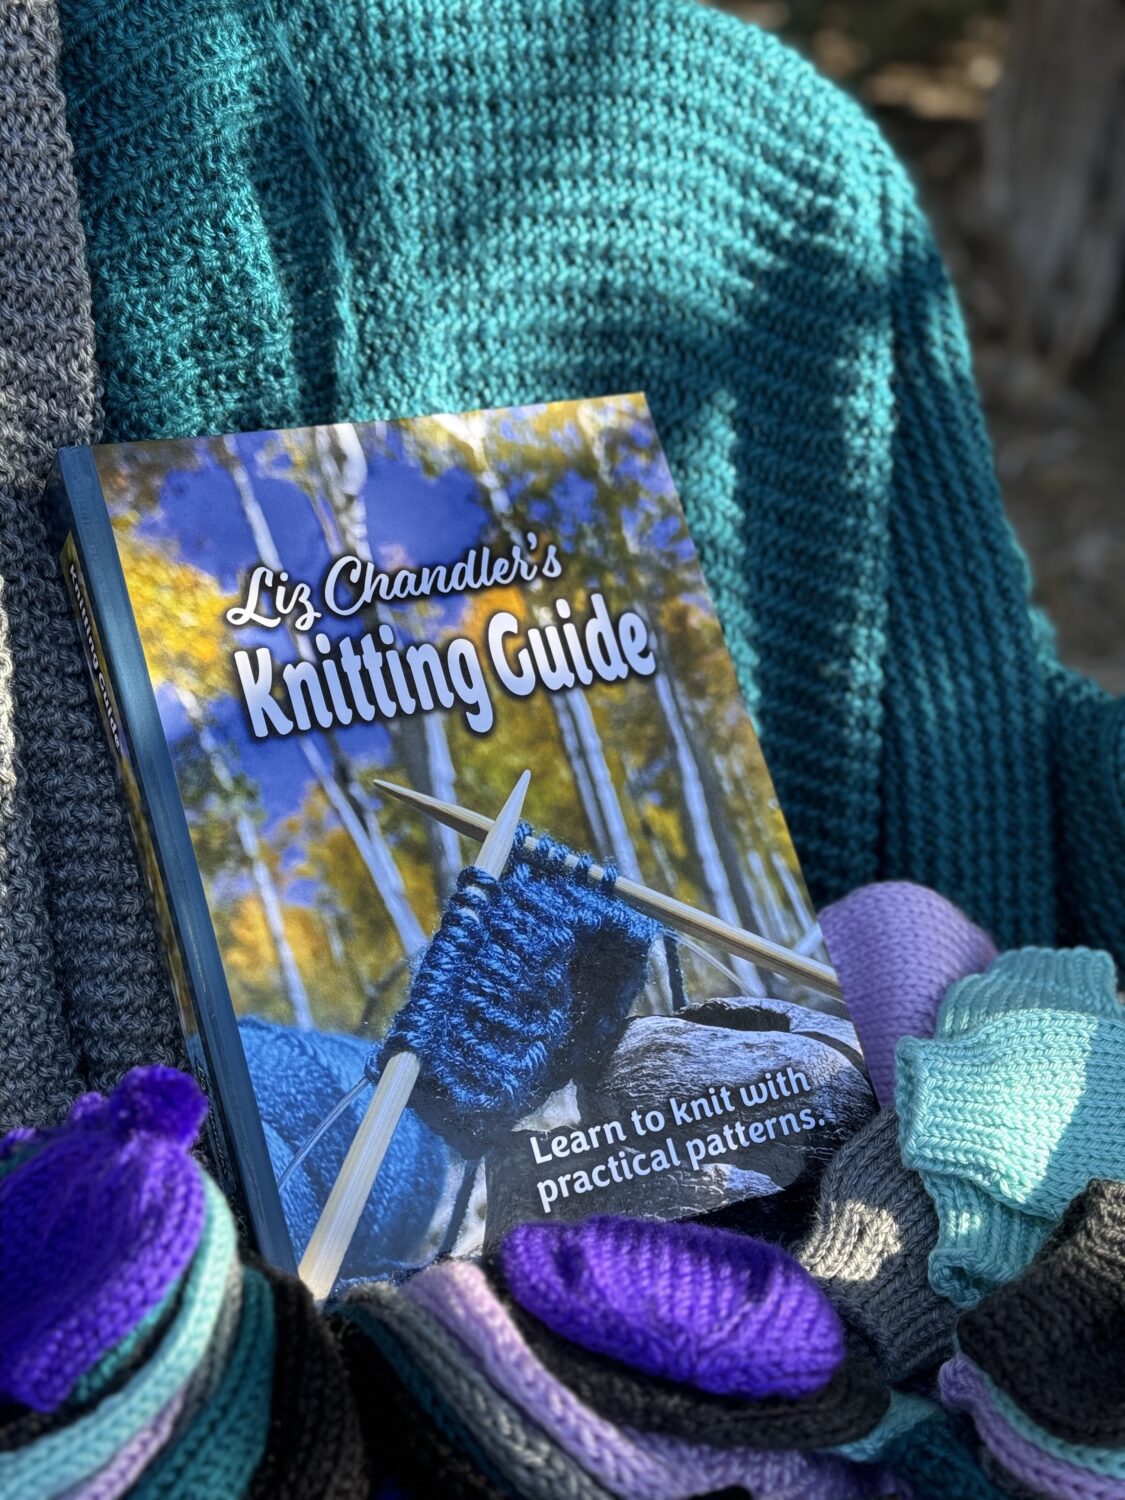 Liz Chandler's Knitting Guide:Learn to Knit with Practical Patterns  (Hardcover Book) - PurlsAndPixels